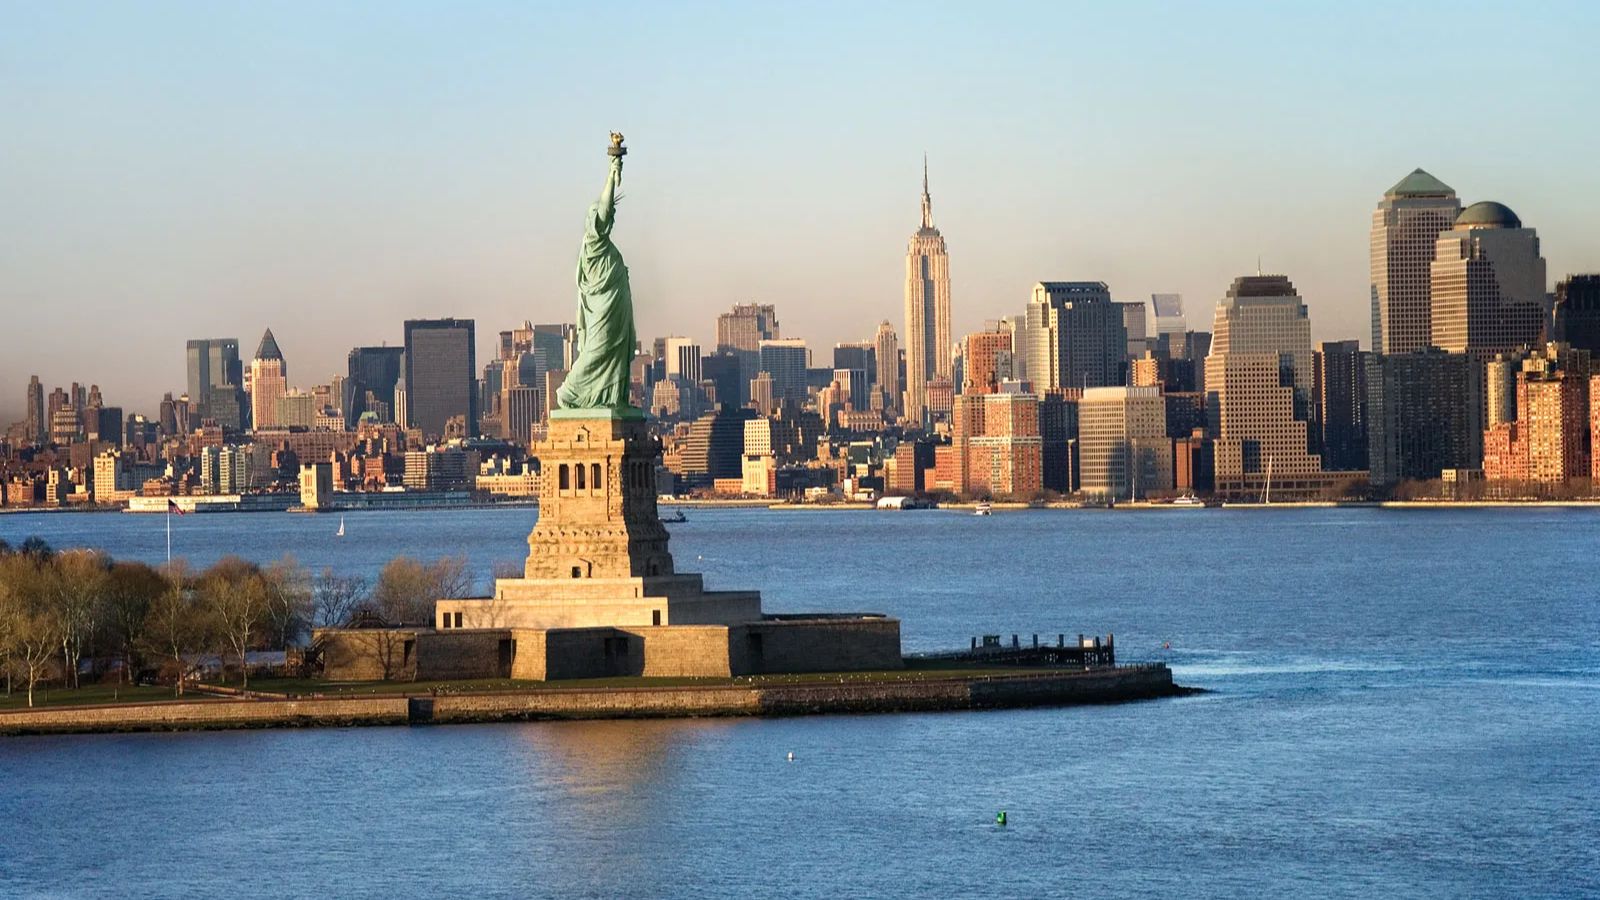 <p>The Big Apple is a <a href="https://frenzhub.com/bucket-list-wonders-explore-the-timeless-beauty-of-these-14-american-landmarks/" rel="noopener">world-class city</a> and a popular travel destination. Though it still has its charms, few places in the nation are worse than this one due to the constant influx of visitors, excessive costs, and few amenities.</p> <p>Visiting Times Square or seeing a Broadway musical might be enjoyable, but you must make all your reservations in advance to participate. The crowds might be unbearable even in that case. You’ll unlikely have a quiet holiday because of the noise pollution and people that make the city seem like it never sleeps.</p>